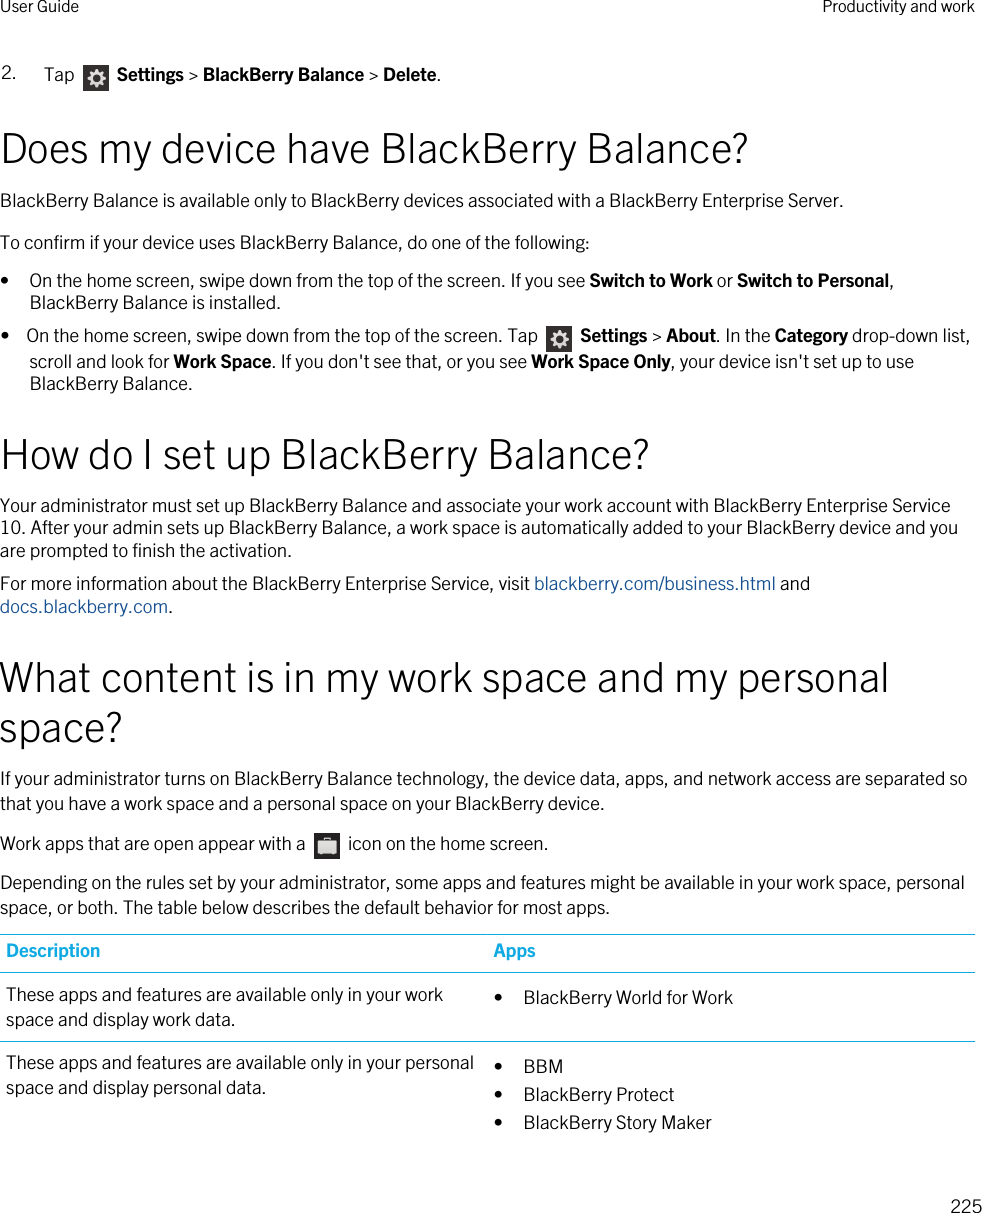 2. Tap   Settings &gt; BlackBerry Balance &gt; Delete.Does my device have BlackBerry Balance?BlackBerry Balance is available only to BlackBerry devices associated with a BlackBerry Enterprise Server.To confirm if your device uses BlackBerry Balance, do one of the following:• On the home screen, swipe down from the top of the screen. If you see Switch to Work or Switch to Personal, BlackBerry Balance is installed.•  On the home screen, swipe down from the top of the screen. Tap   Settings &gt; About. In the Category drop-down list, scroll and look for Work Space. If you don&apos;t see that, or you see Work Space Only, your device isn&apos;t set up to use BlackBerry Balance.How do I set up BlackBerry Balance?Your administrator must set up BlackBerry Balance and associate your work account with BlackBerry Enterprise Service 10. After your admin sets up BlackBerry Balance, a work space is automatically added to your BlackBerry device and you are prompted to finish the activation.For more information about the BlackBerry Enterprise Service, visit blackberry.com/business.html and docs.blackberry.com.What content is in my work space and my personal space?If your administrator turns on BlackBerry Balance technology, the device data, apps, and network access are separated so that you have a work space and a personal space on your BlackBerry device.Work apps that are open appear with a   icon on the home screen.Depending on the rules set by your administrator, some apps and features might be available in your work space, personal space, or both. The table below describes the default behavior for most apps.Description AppsThese apps and features are available only in your work space and display work data. • BlackBerry World for WorkThese apps and features are available only in your personal space and display personal data. • BBM• BlackBerry Protect• BlackBerry Story MakerUser Guide Productivity and work225